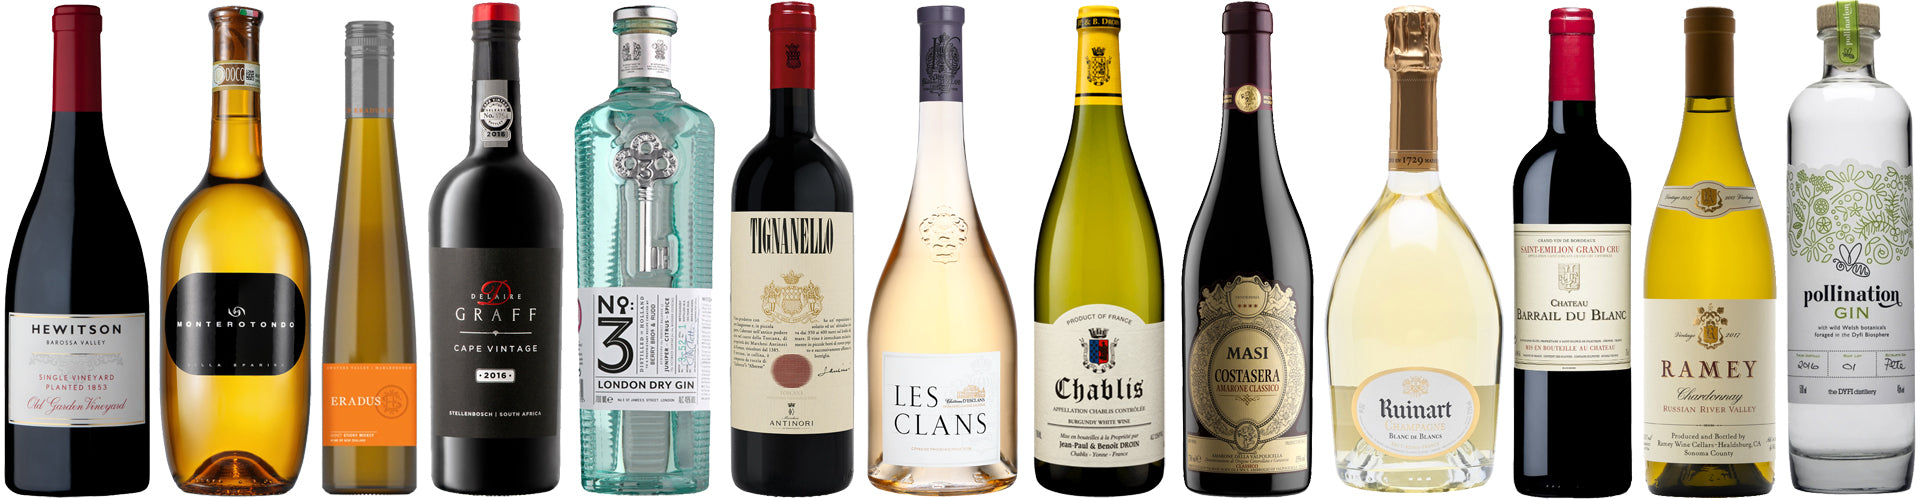 Father's Day Collection of Wines Champagne & Spirits